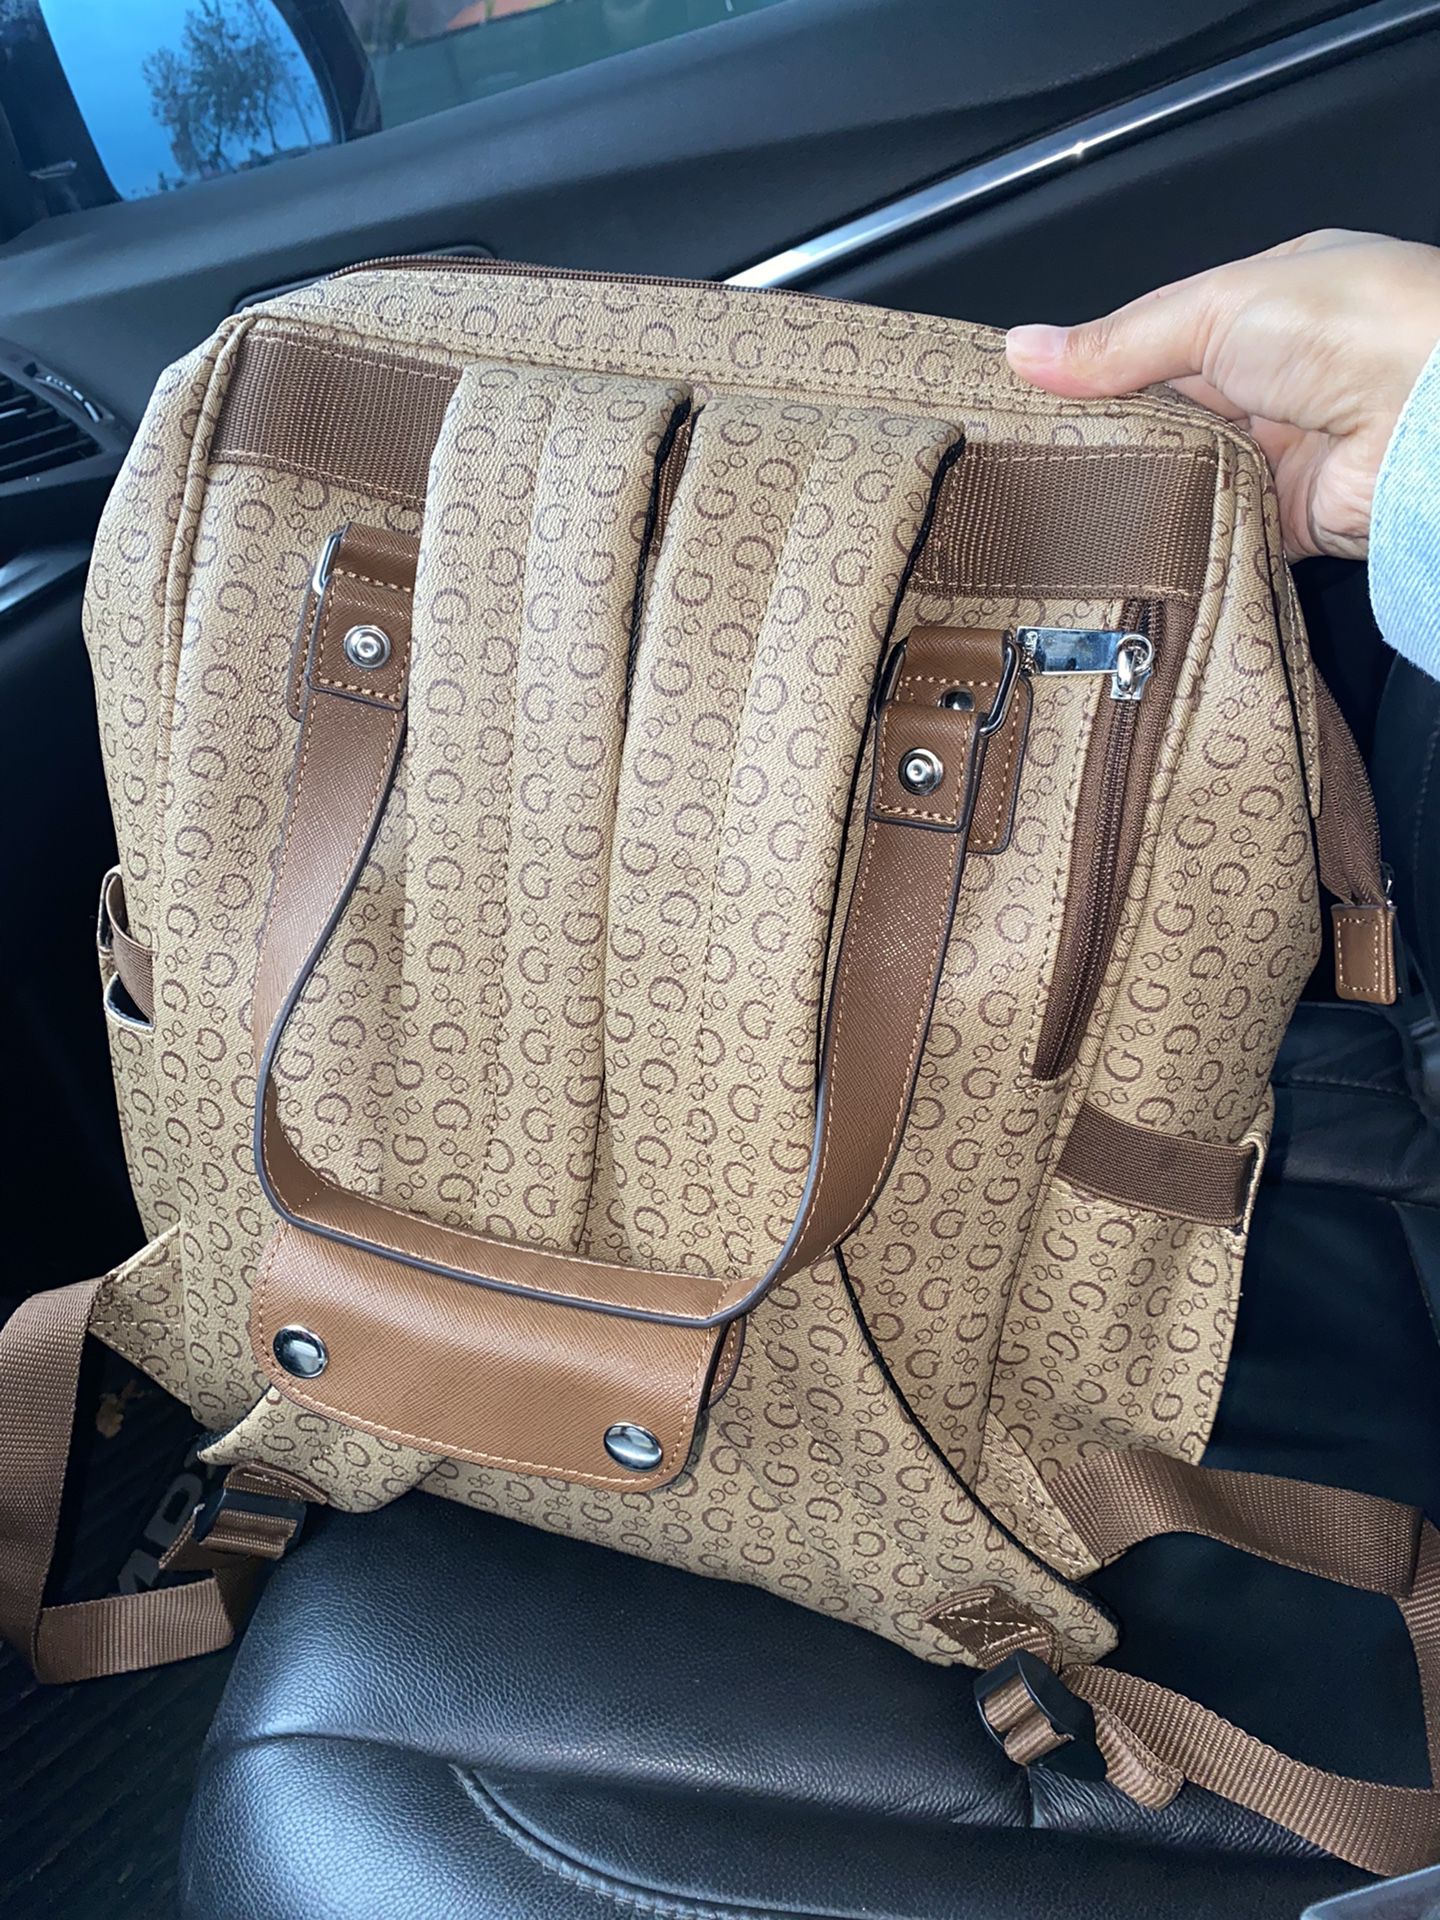 Guess Backpack for Sale in Everett, WA - OfferUp